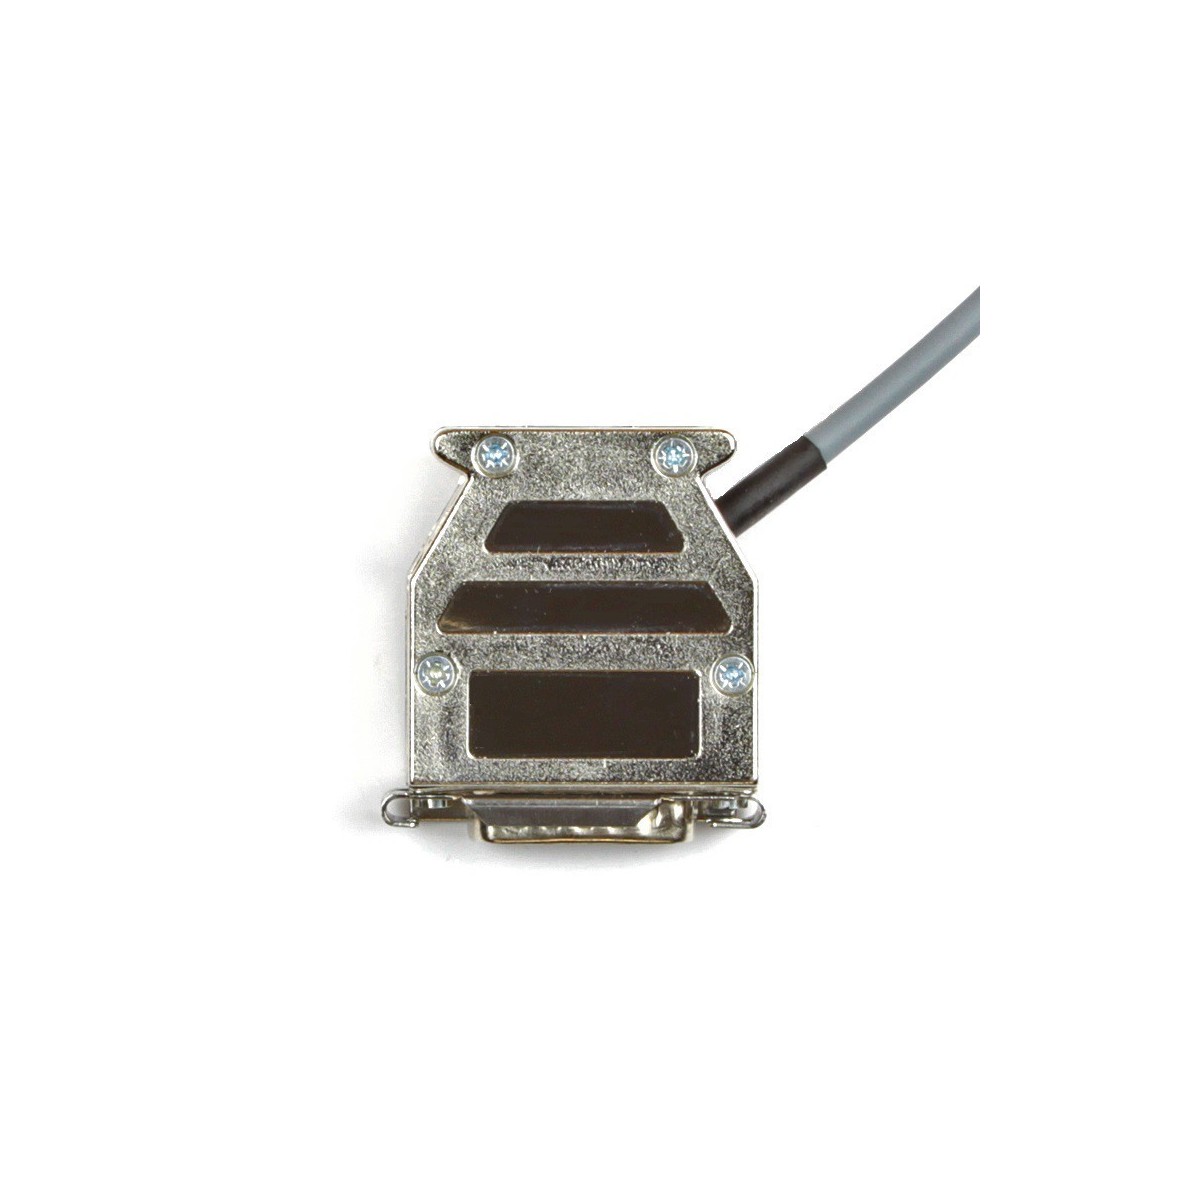 SUB-D 15 connector housing with sliding lock